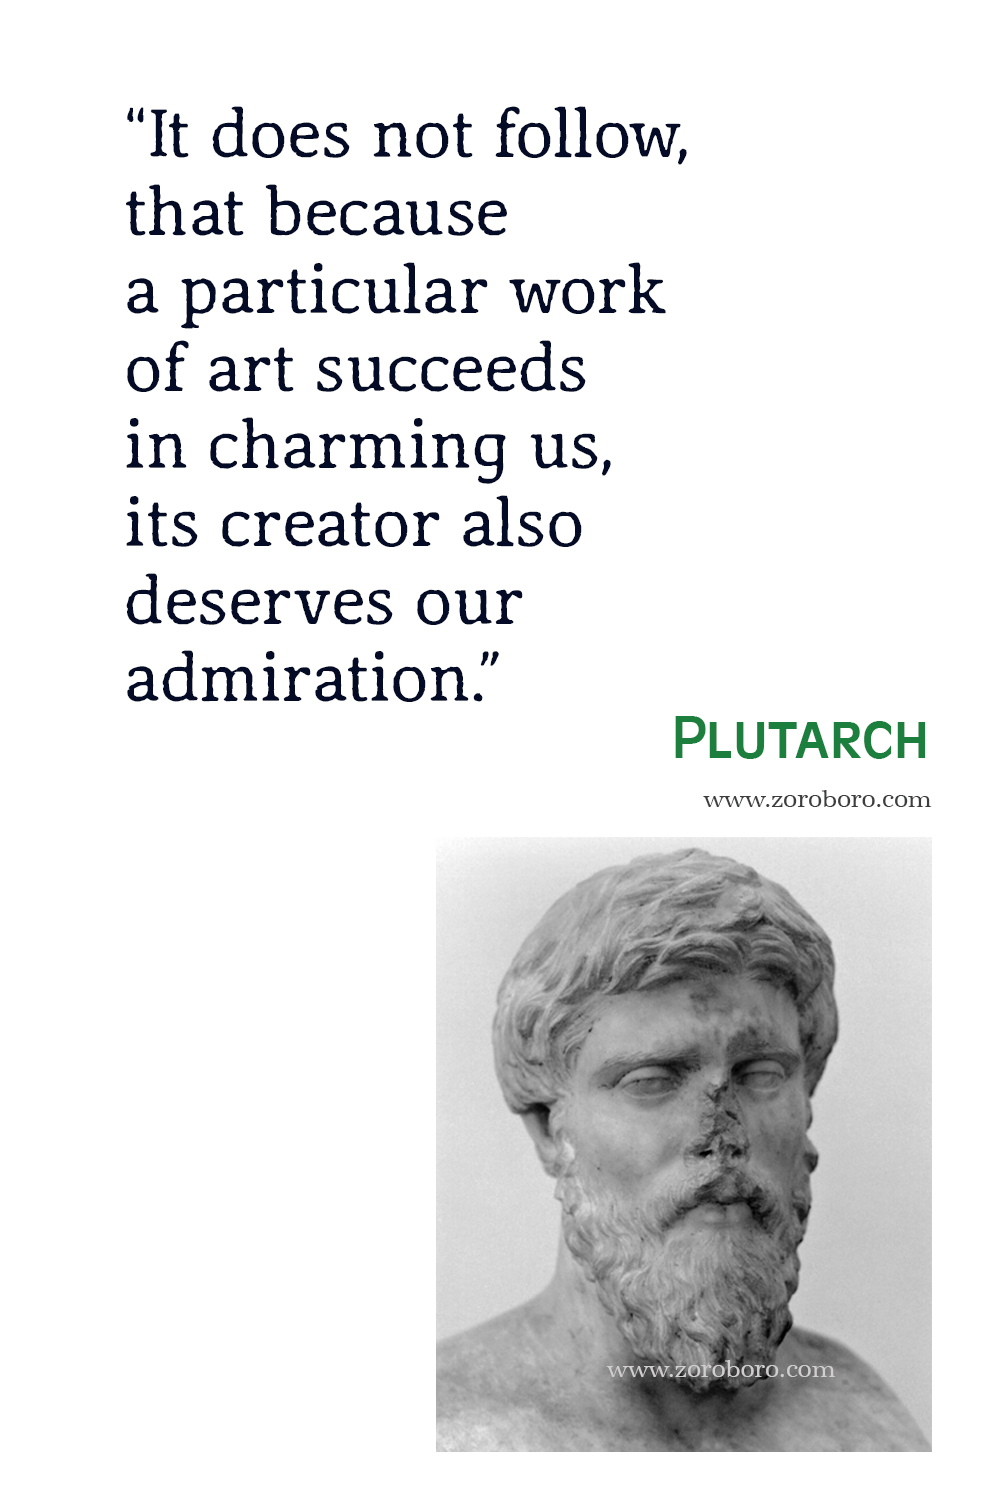 Plutarch Quotes, Plutarch Philosophy, Plutarch, Plutarch Photo, Plutarch Images, Plutarch Books Quotes. Plutarch Moralia, Parallel Lives Book by Plutarch Quotes.